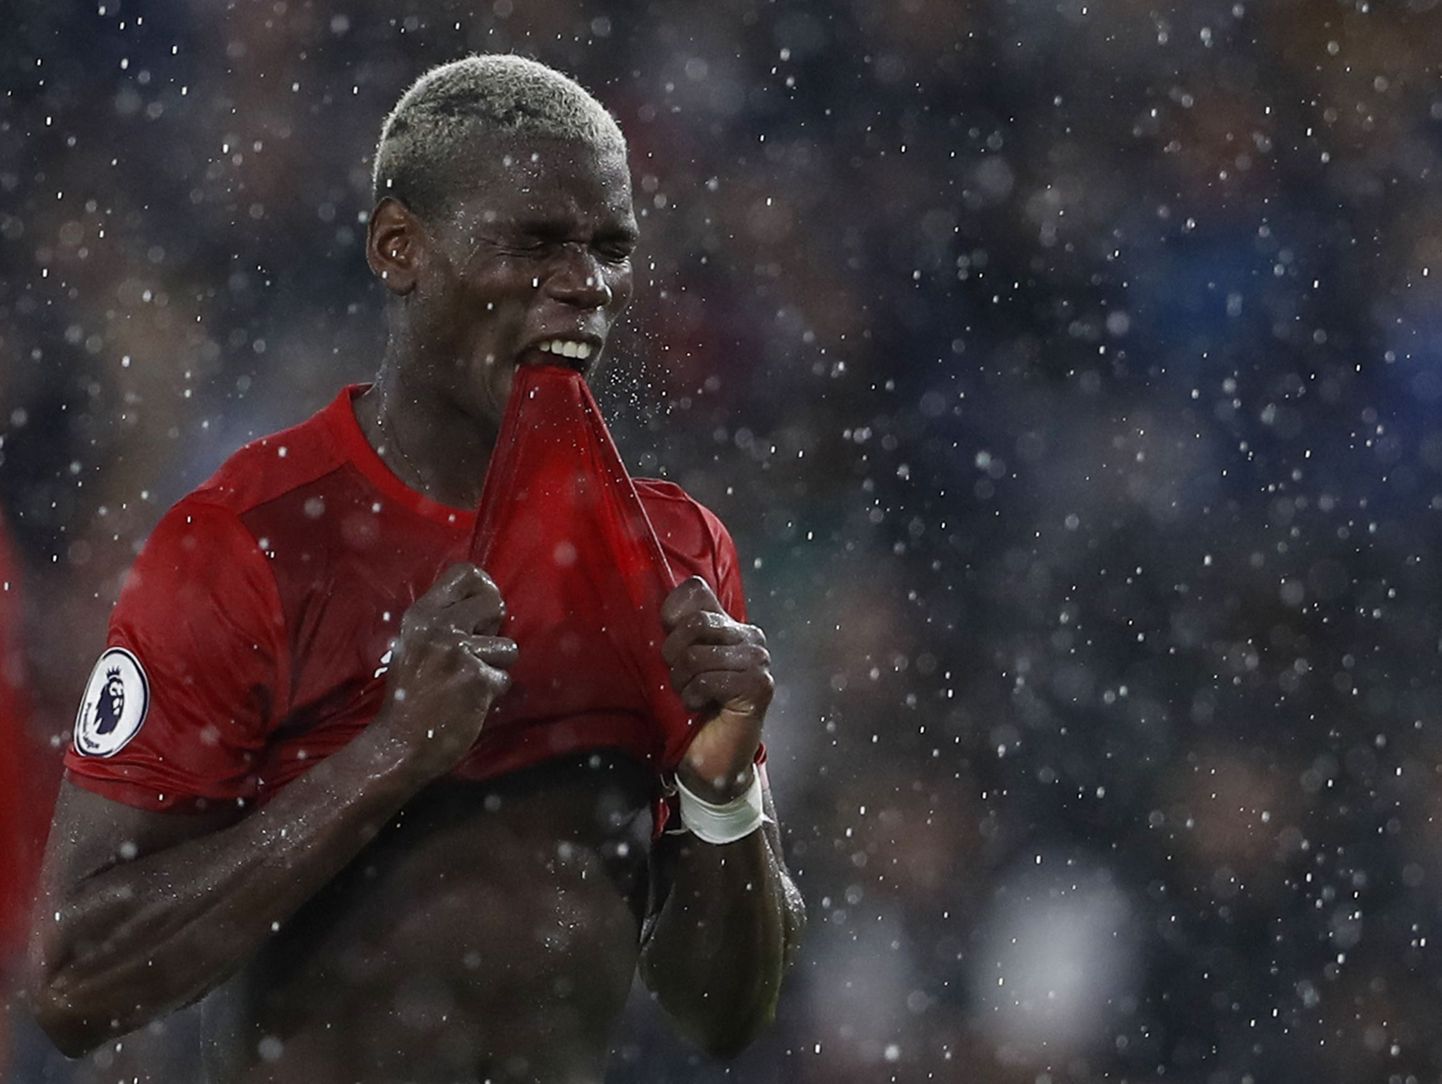 Football Soccer Britain- Hull City v Manchester United - Premier League - The Kingston Communications Stadium - 27/8/16
Manchester United's Paul Pogba looks dejected
Action Images via Reuters / Lee Smith
Livepic
EDITORIAL USE ONLY. No use with unauthorized audio, video, data, fixture lists, club/league logos or "live" services. Online in-match use limited to 45 images, no video emulation. No use in betting, games or single club/league/player publications.  Please contact your account representative for further details.